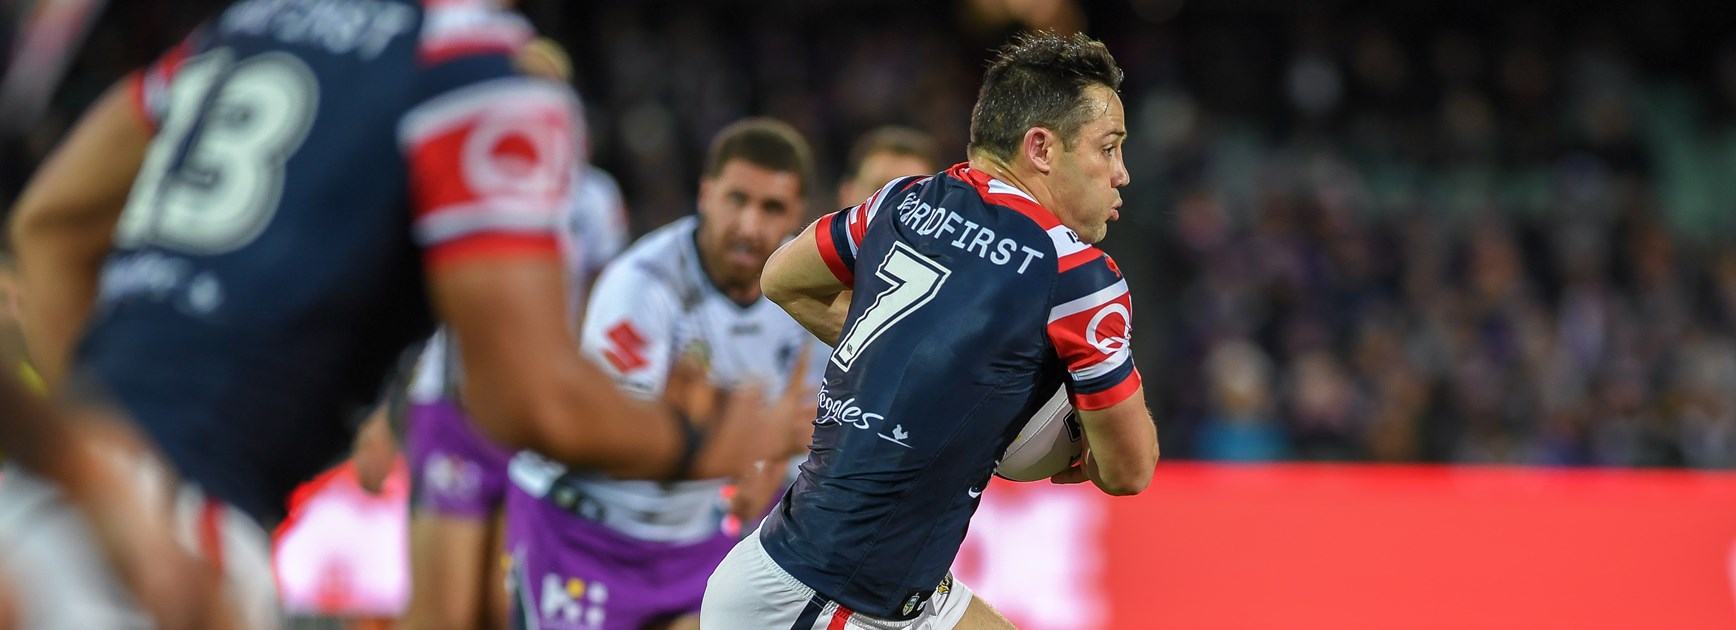 'Bring it on': Cronk welcomes great expectations